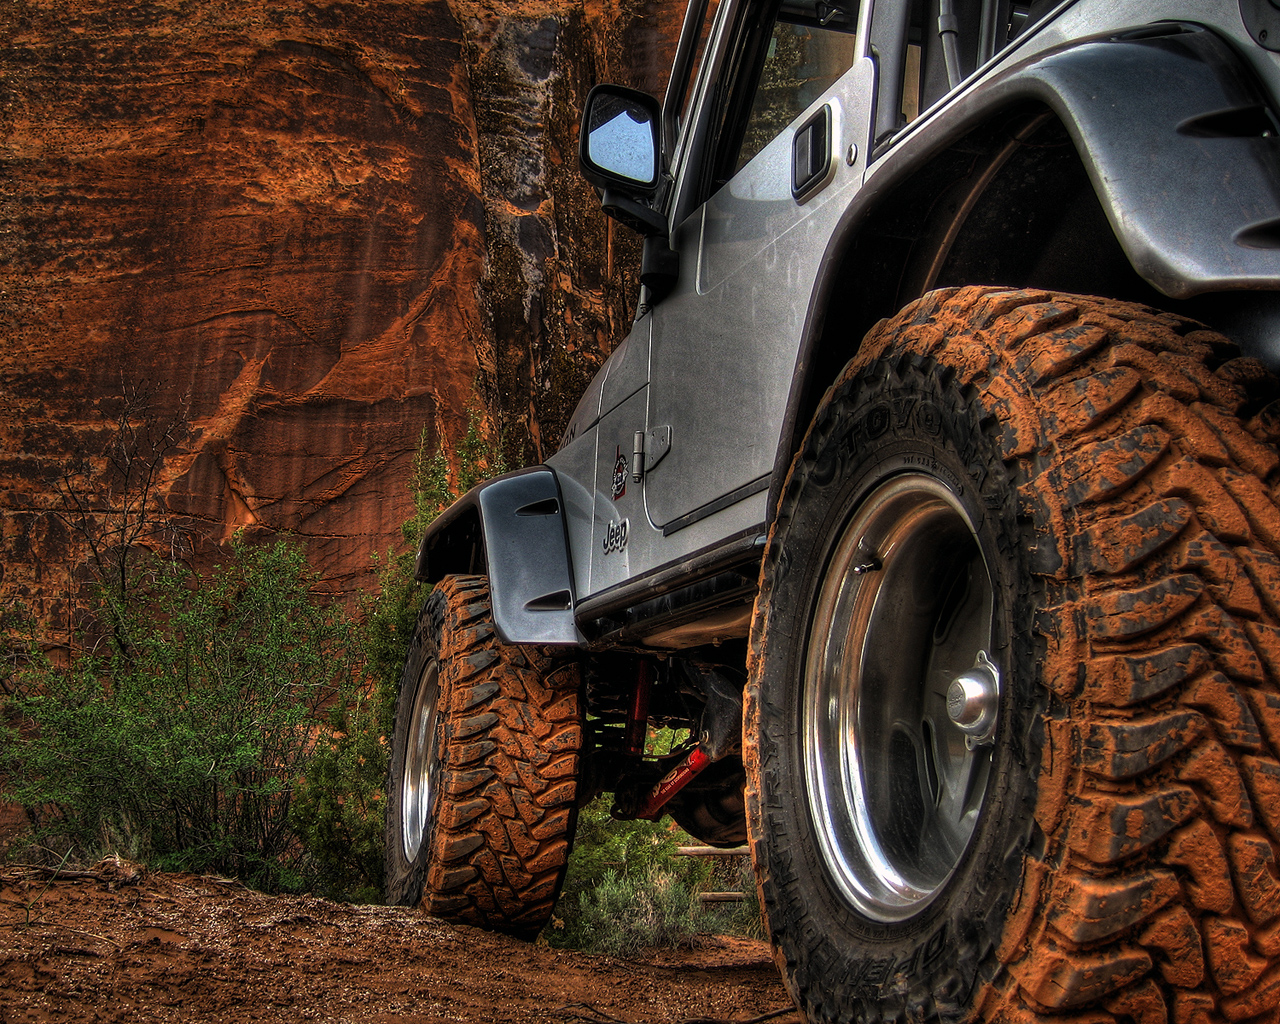 Jeep wallpapers for desktop, download free Jeep pictures and backgrounds  for PC 